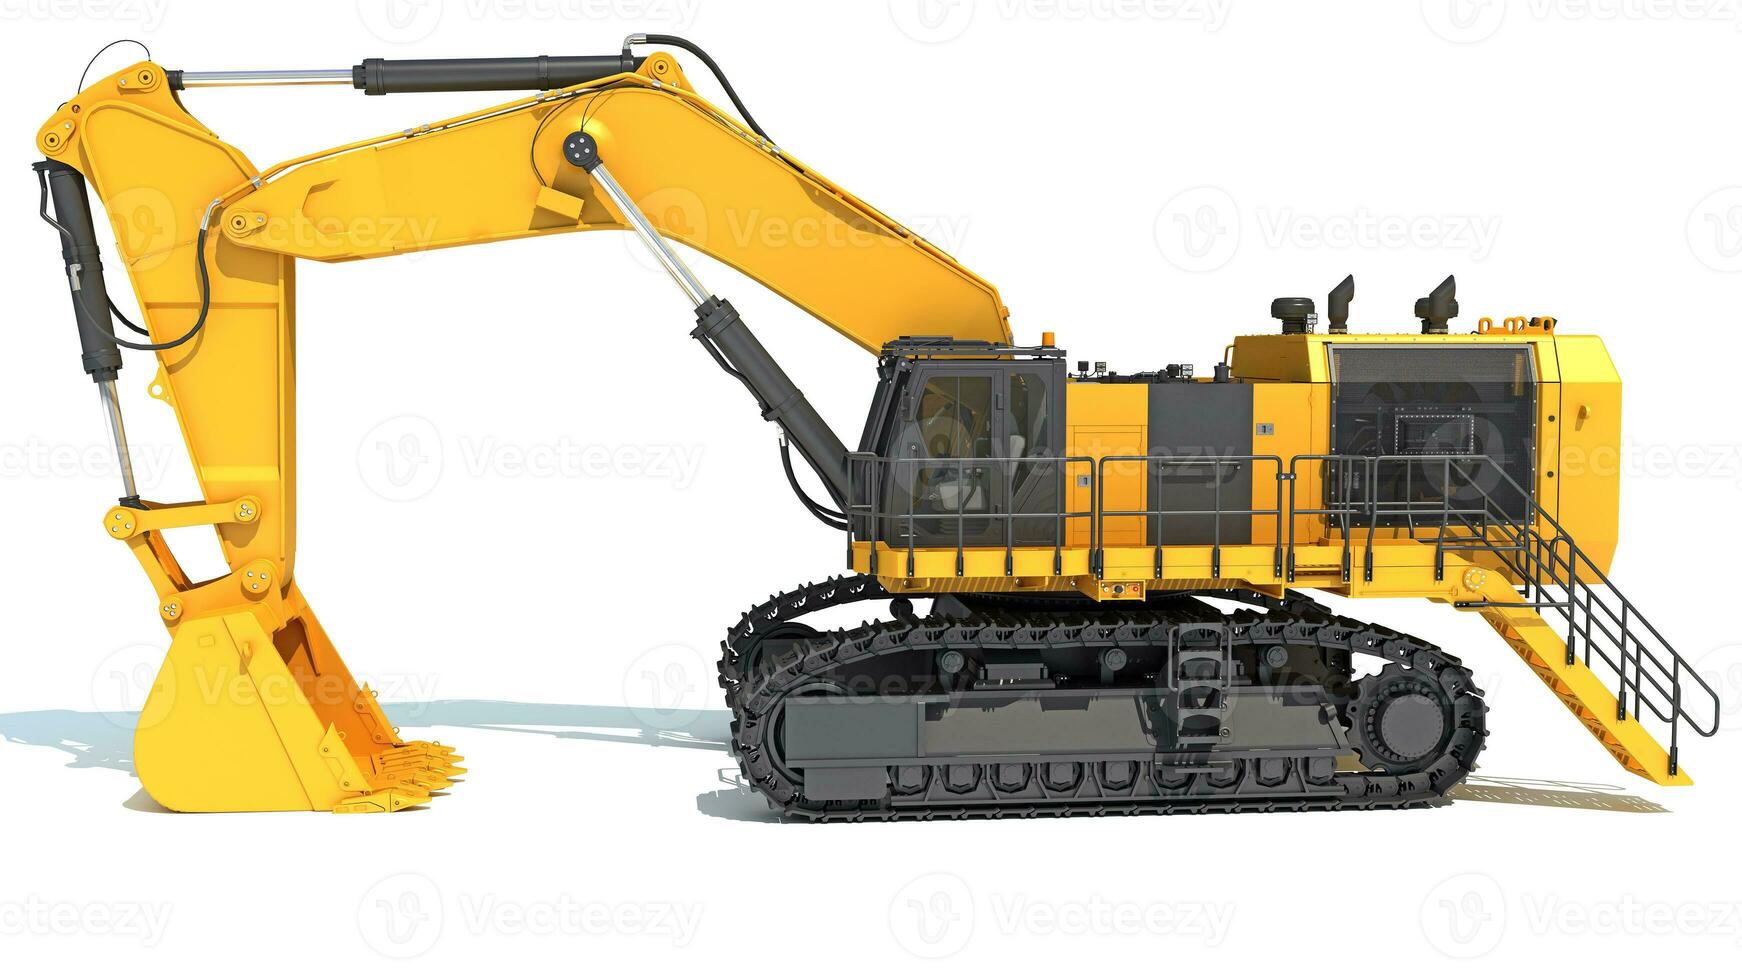 Tracked Mining Excavator heavy construction machinery 3D rendering photo